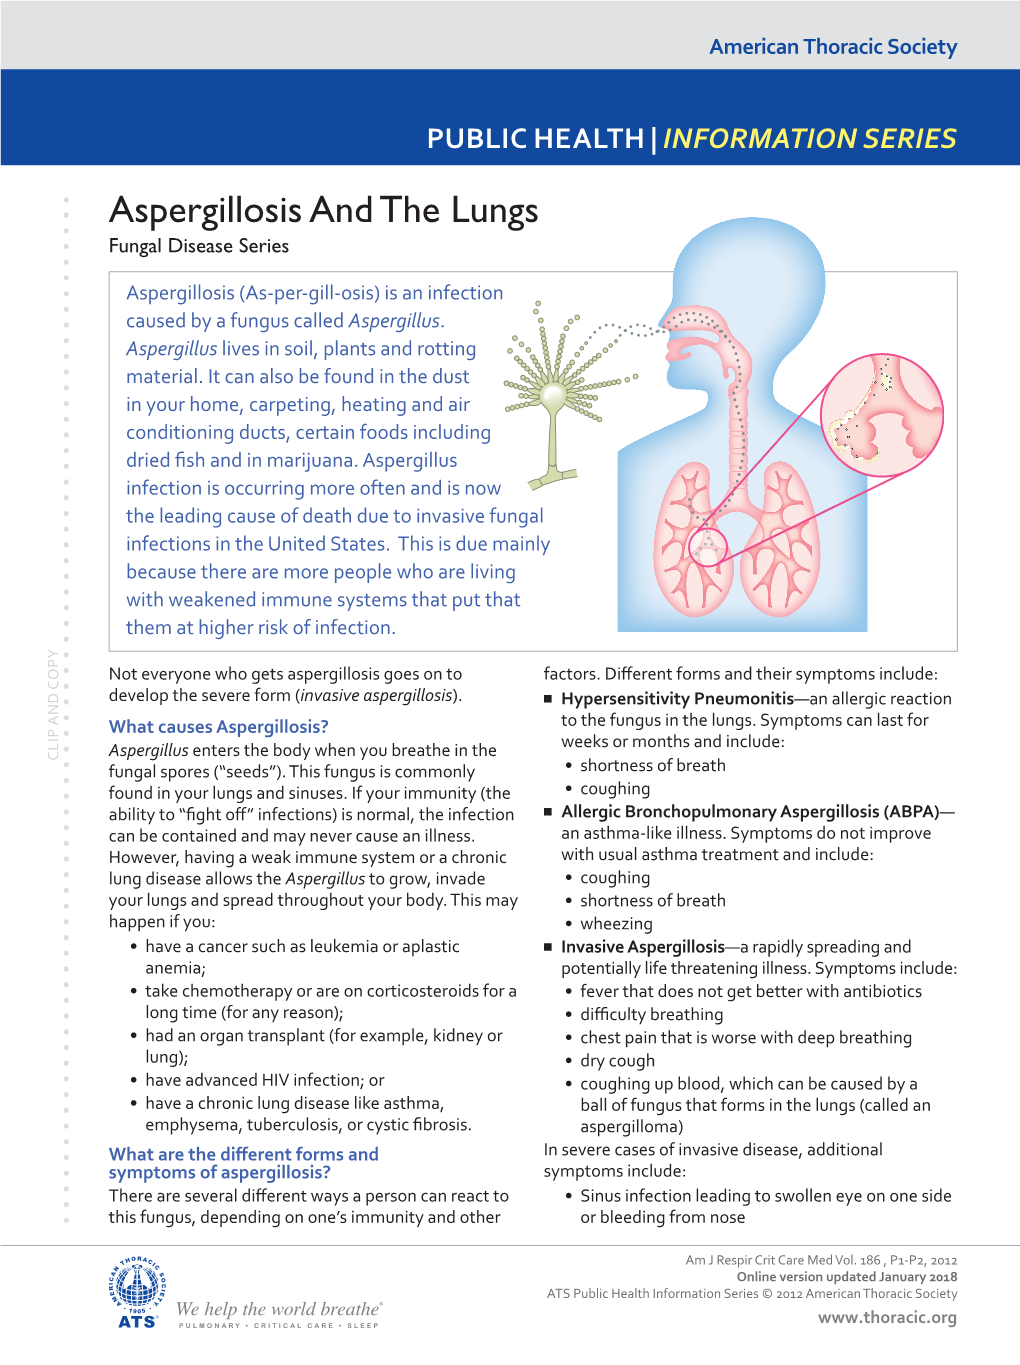 Aspergillosis and the Lungs Fungal Disease Series